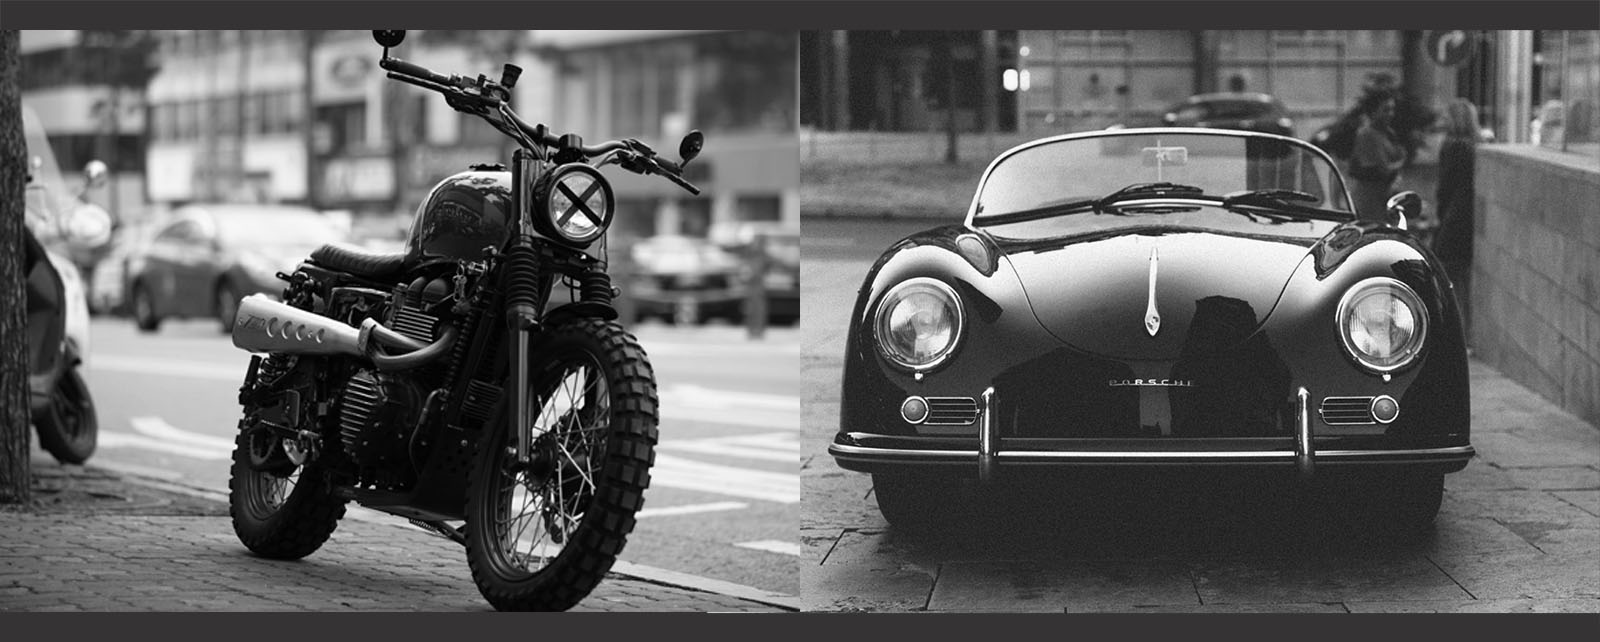 There’s nothing more freeing than riding a car or motorcycle. That sense of freedom that comes from the wind hitting your face at a high speeds, no other sound than the roar of the engine. | DAX Cafe Racer - Fresh Roasted Coffee for Riders | BoostYourRide